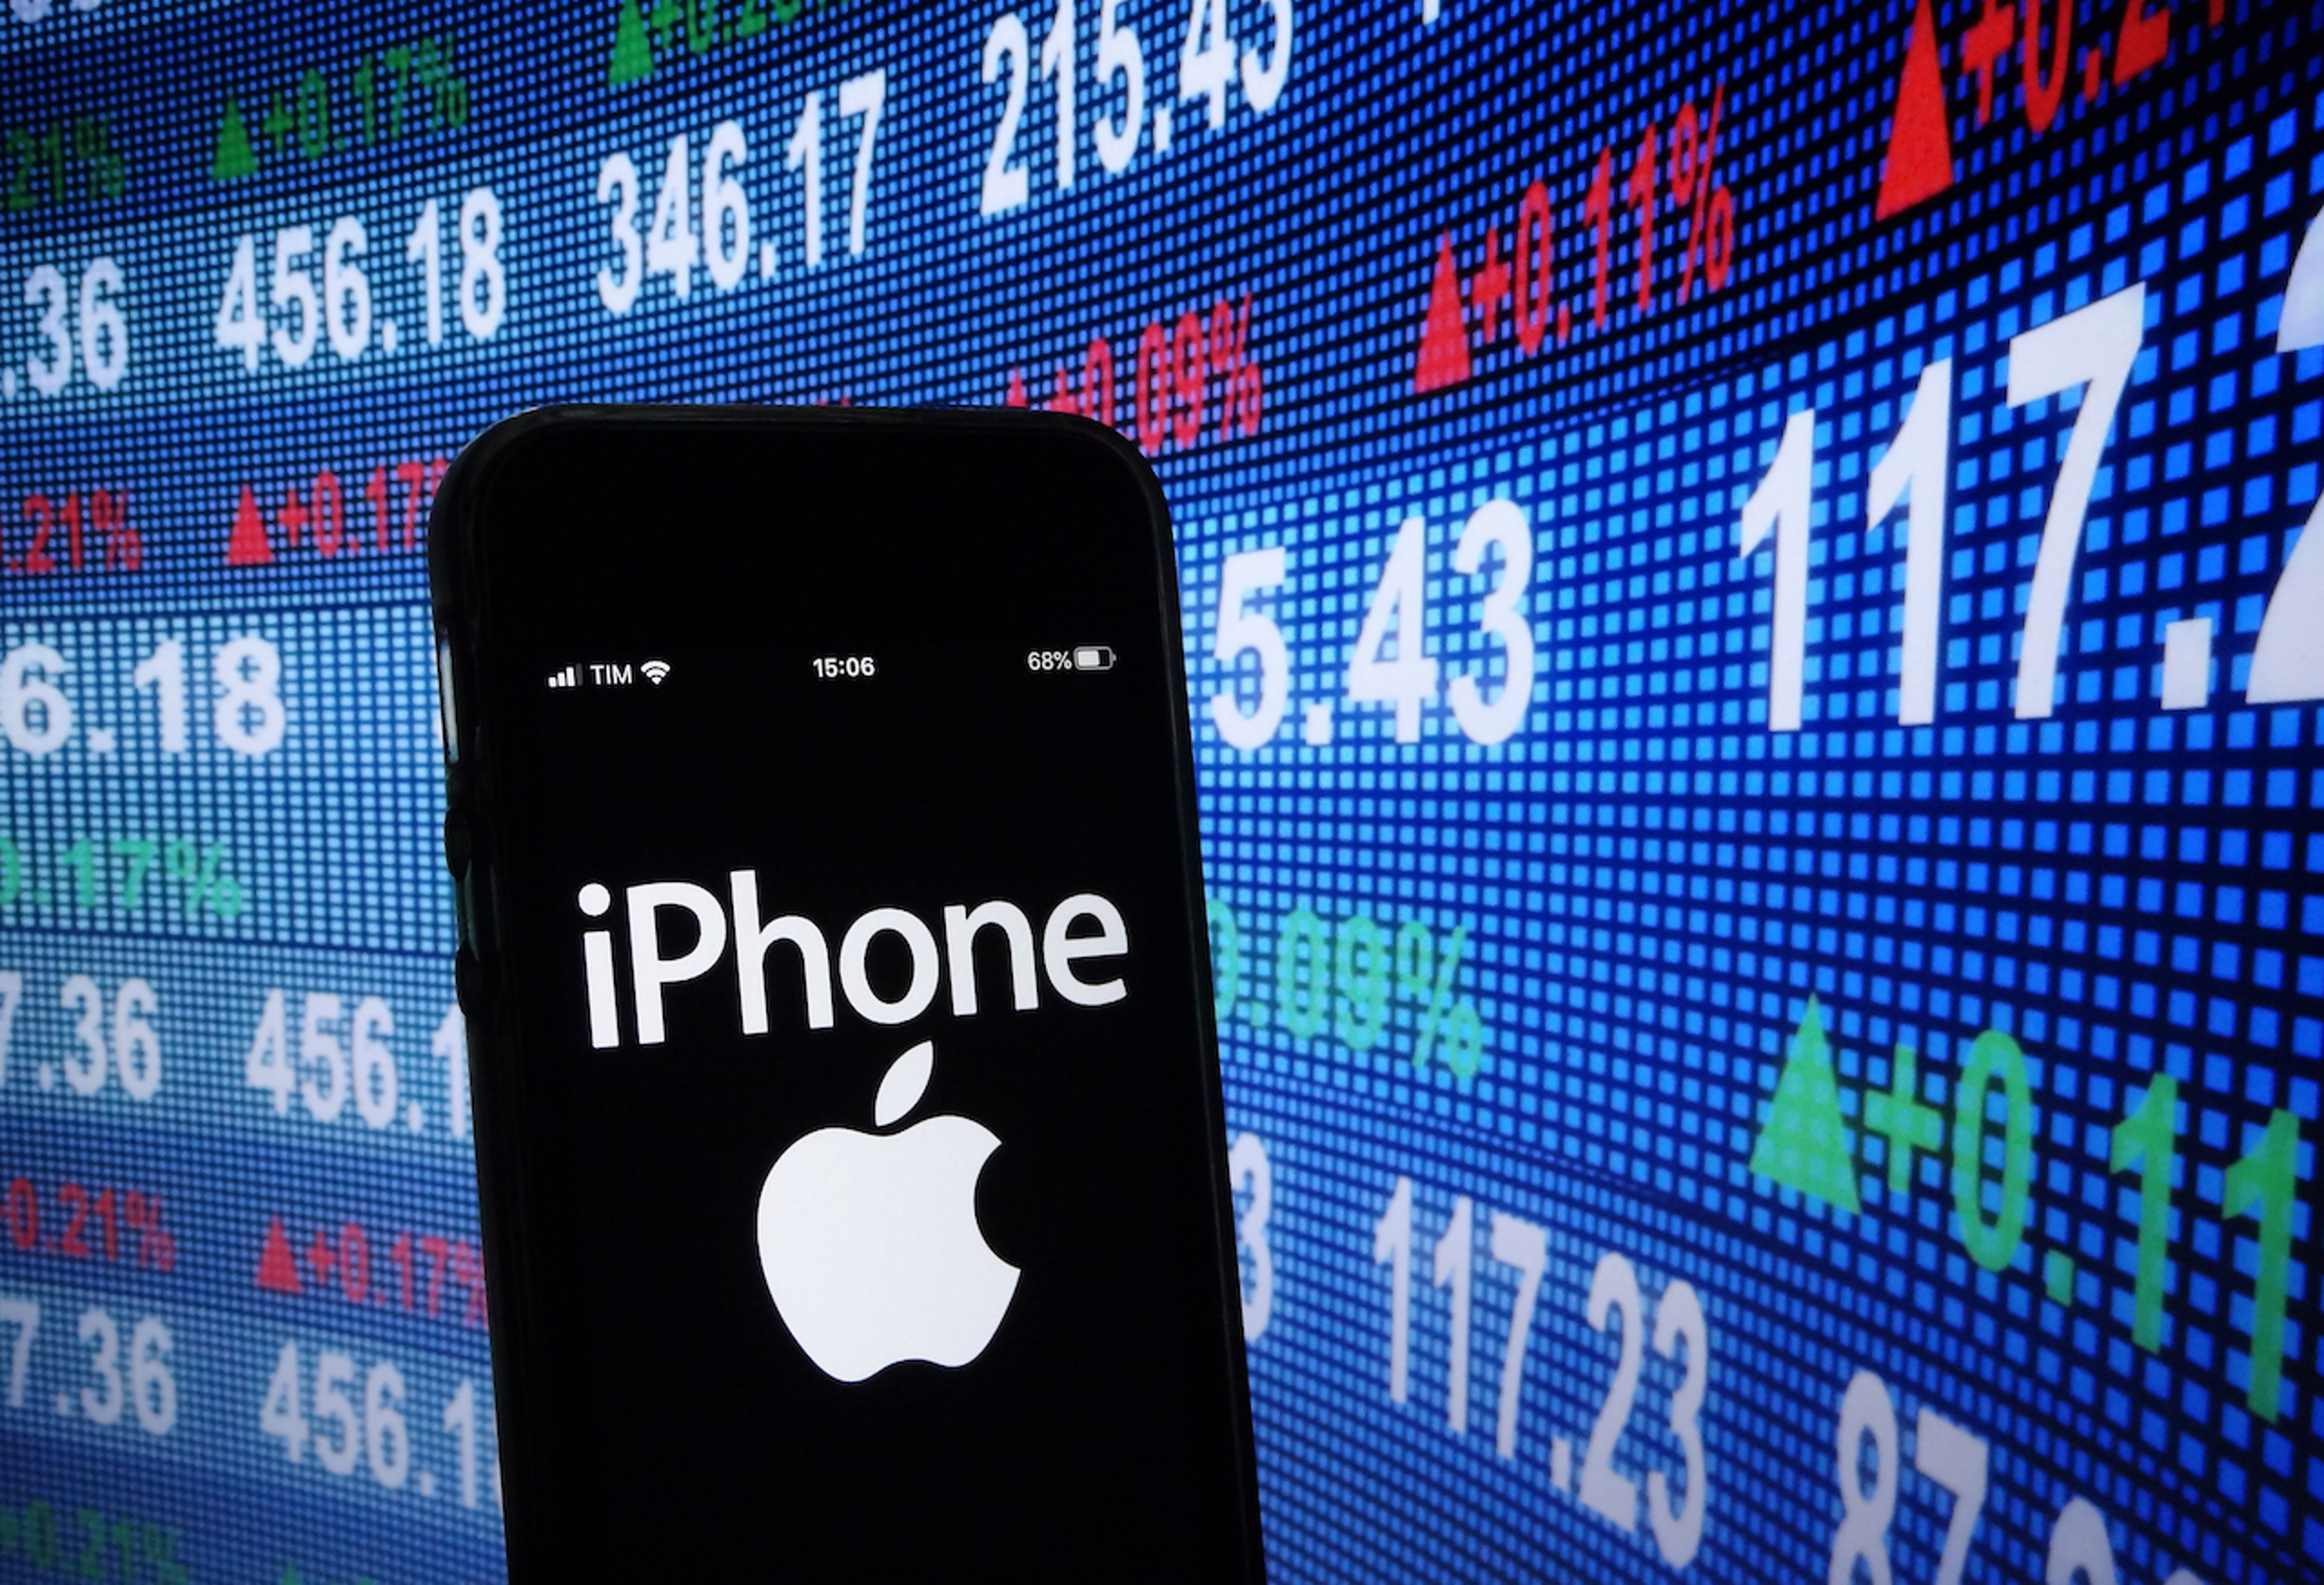 7 Stocks Most Likely To Be Impacted By iPhone 14 Delays